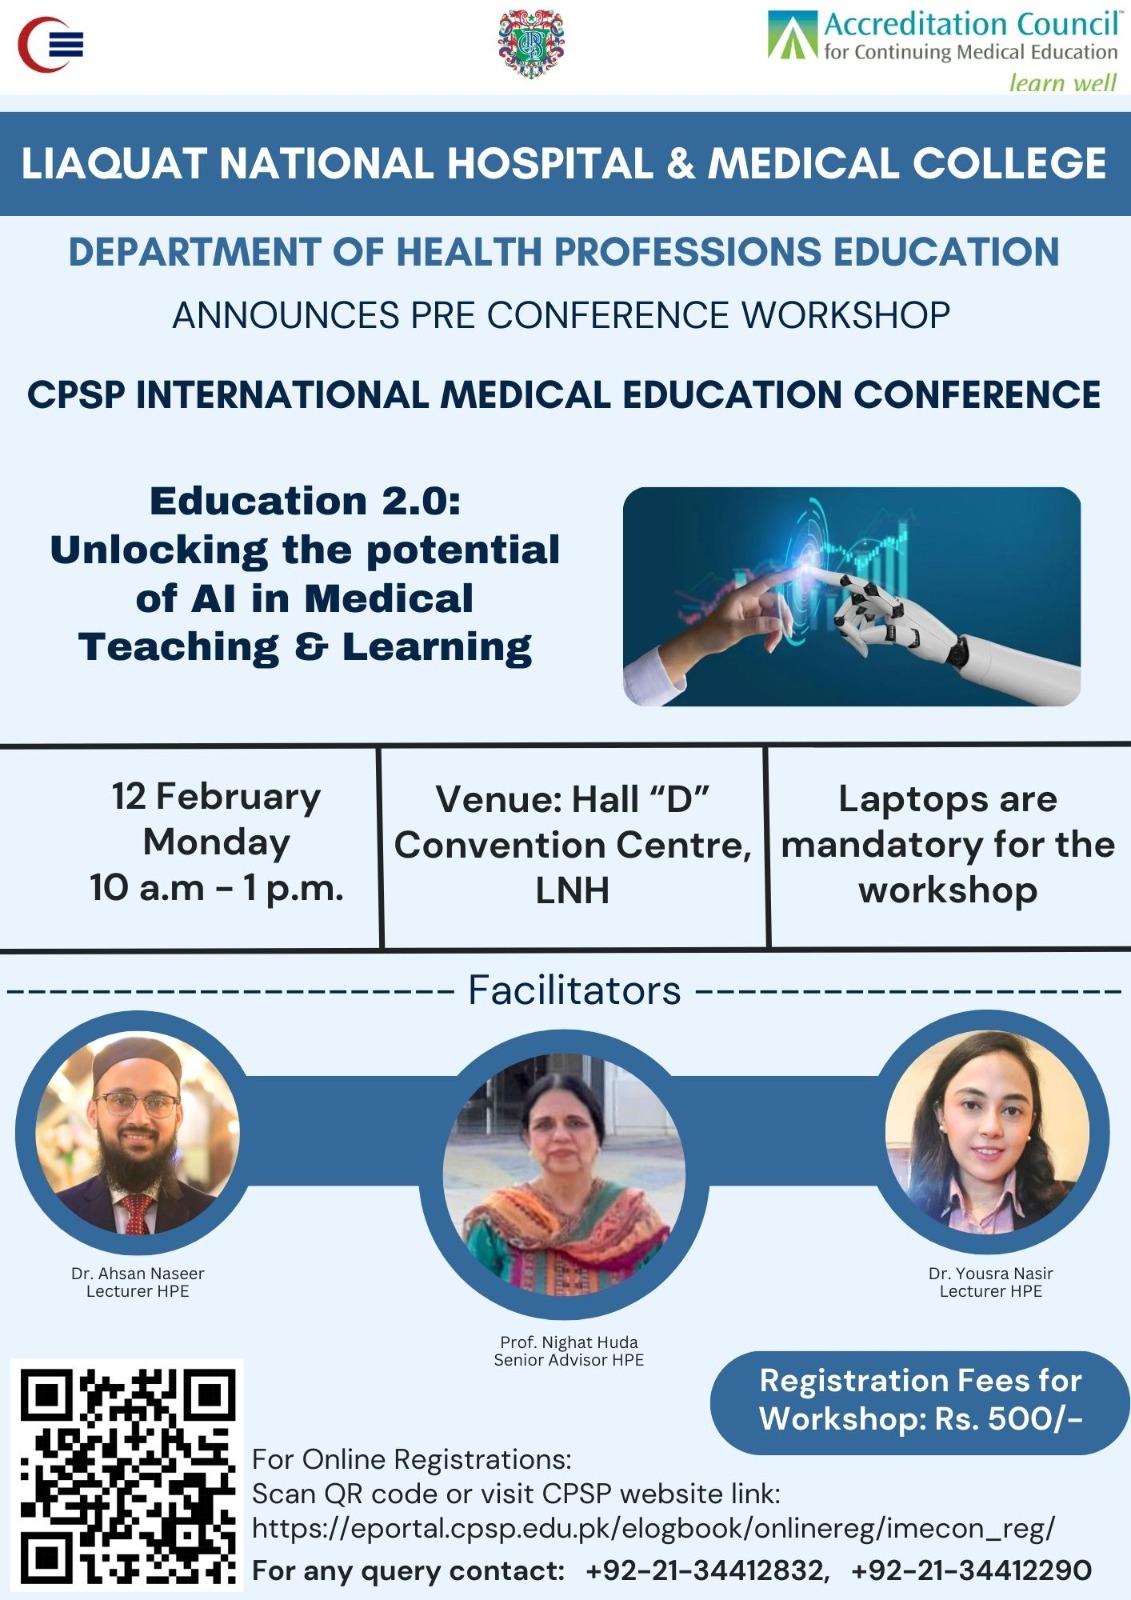 IMECON-24 | Pre-conference workshop on Education 2.0: Unlocking the Potential of AI in Medical Teaching and Learning